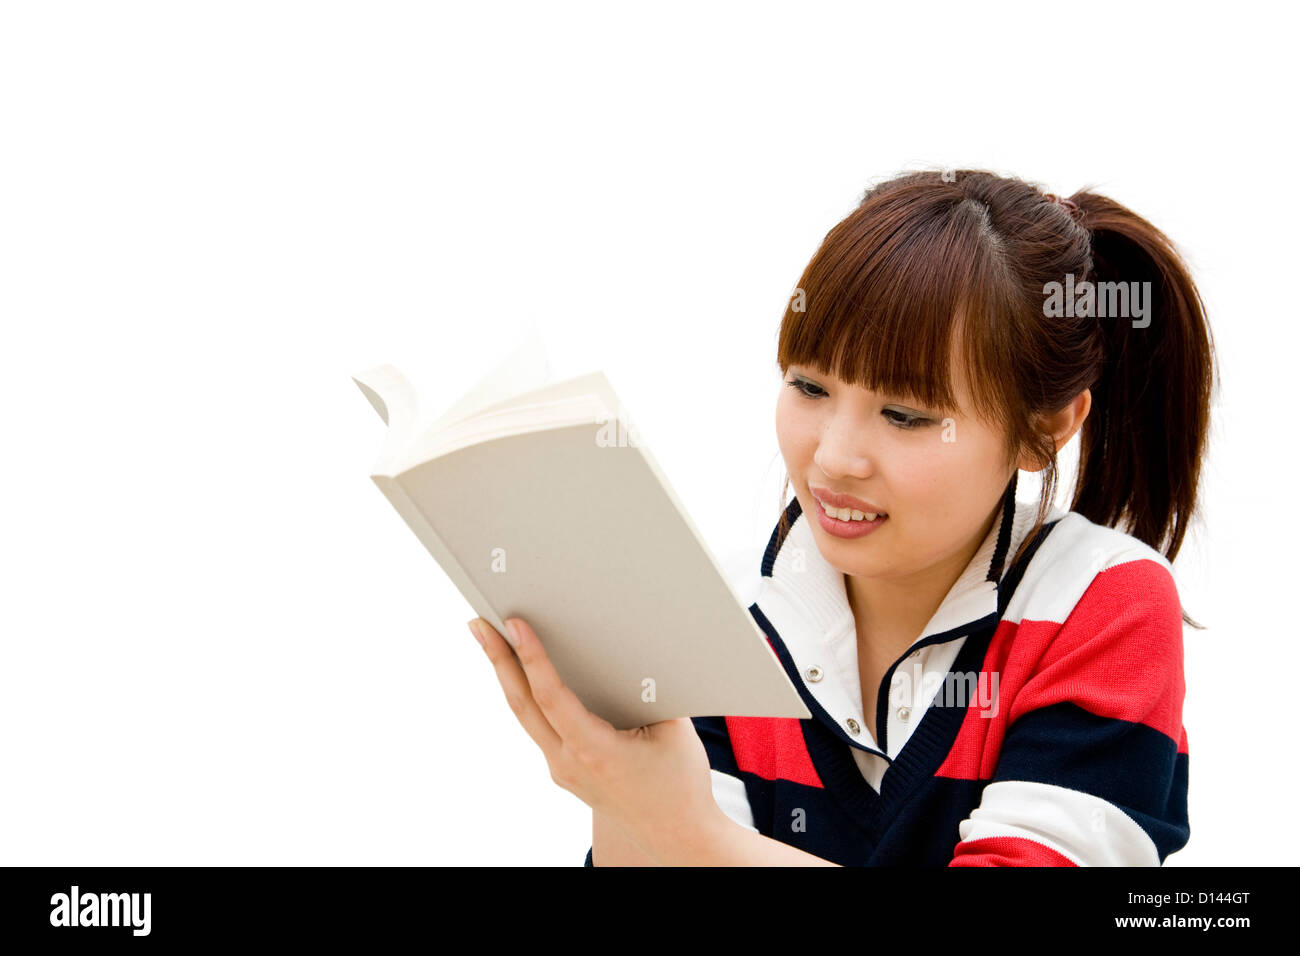 Girl reading book, isolated on white. Stock Photo